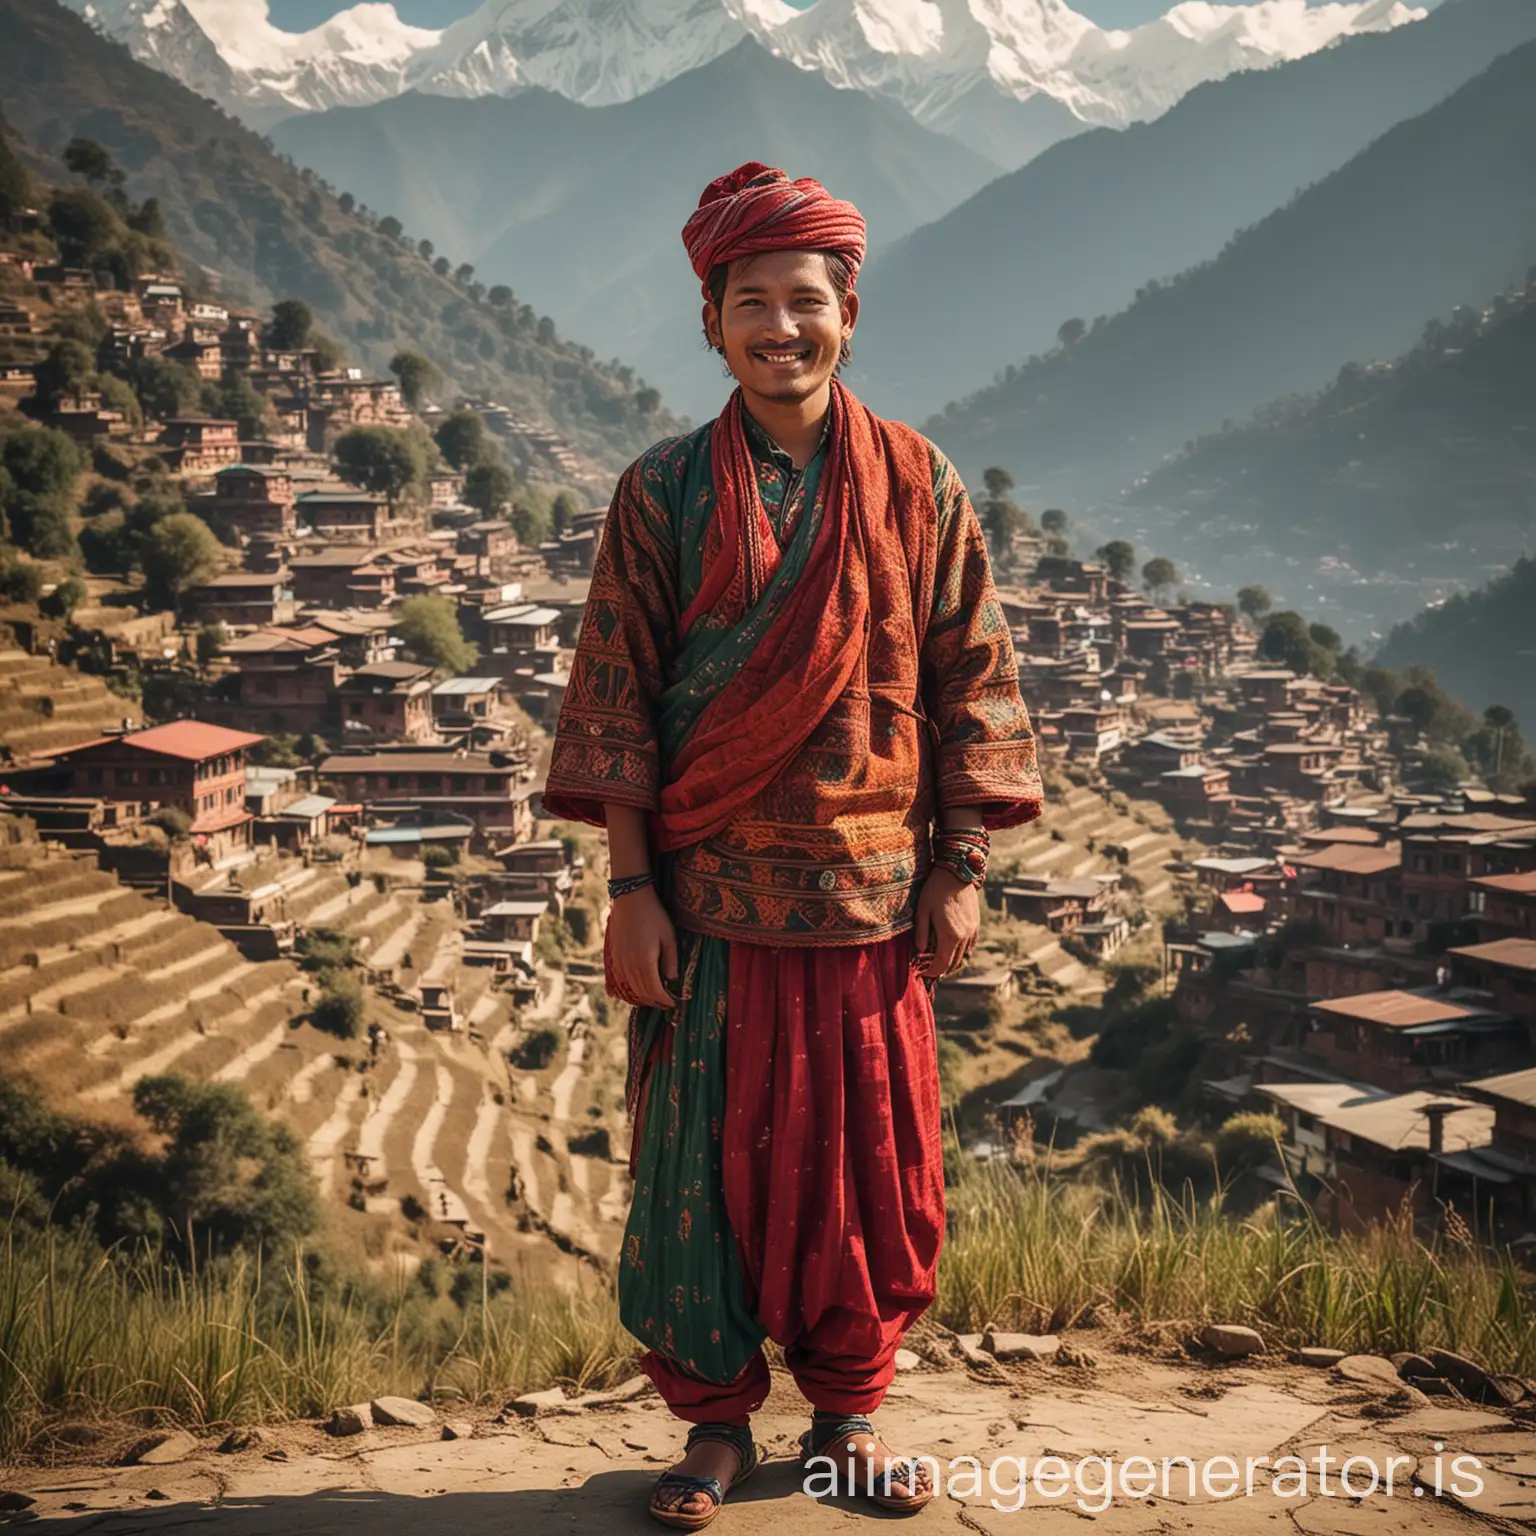 Capture a full-body photo of a Nepali individual standing against a picturesque backdrop. The person should be dressed in traditional Nepali attire, with vibrant colors and intricate patterns. Ensure the background highlights the natural beauty of Nepal, such as the Himalayas, terraced fields, or historic architecture. The person should be centered, with a confident and relaxed posture, smiling naturally.